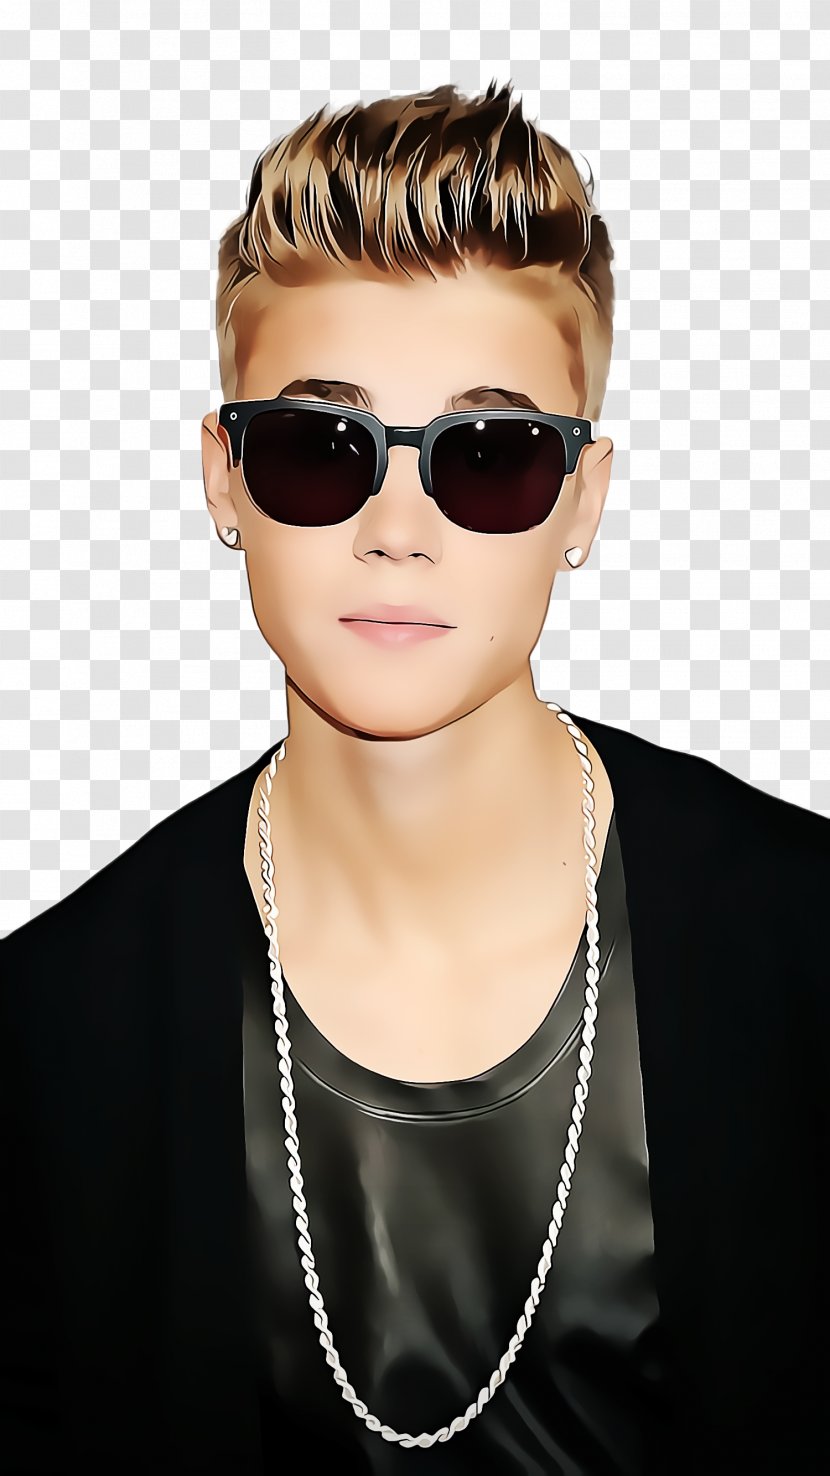 Glasses - Sunglasses - Forehead Blond Transparent PNG